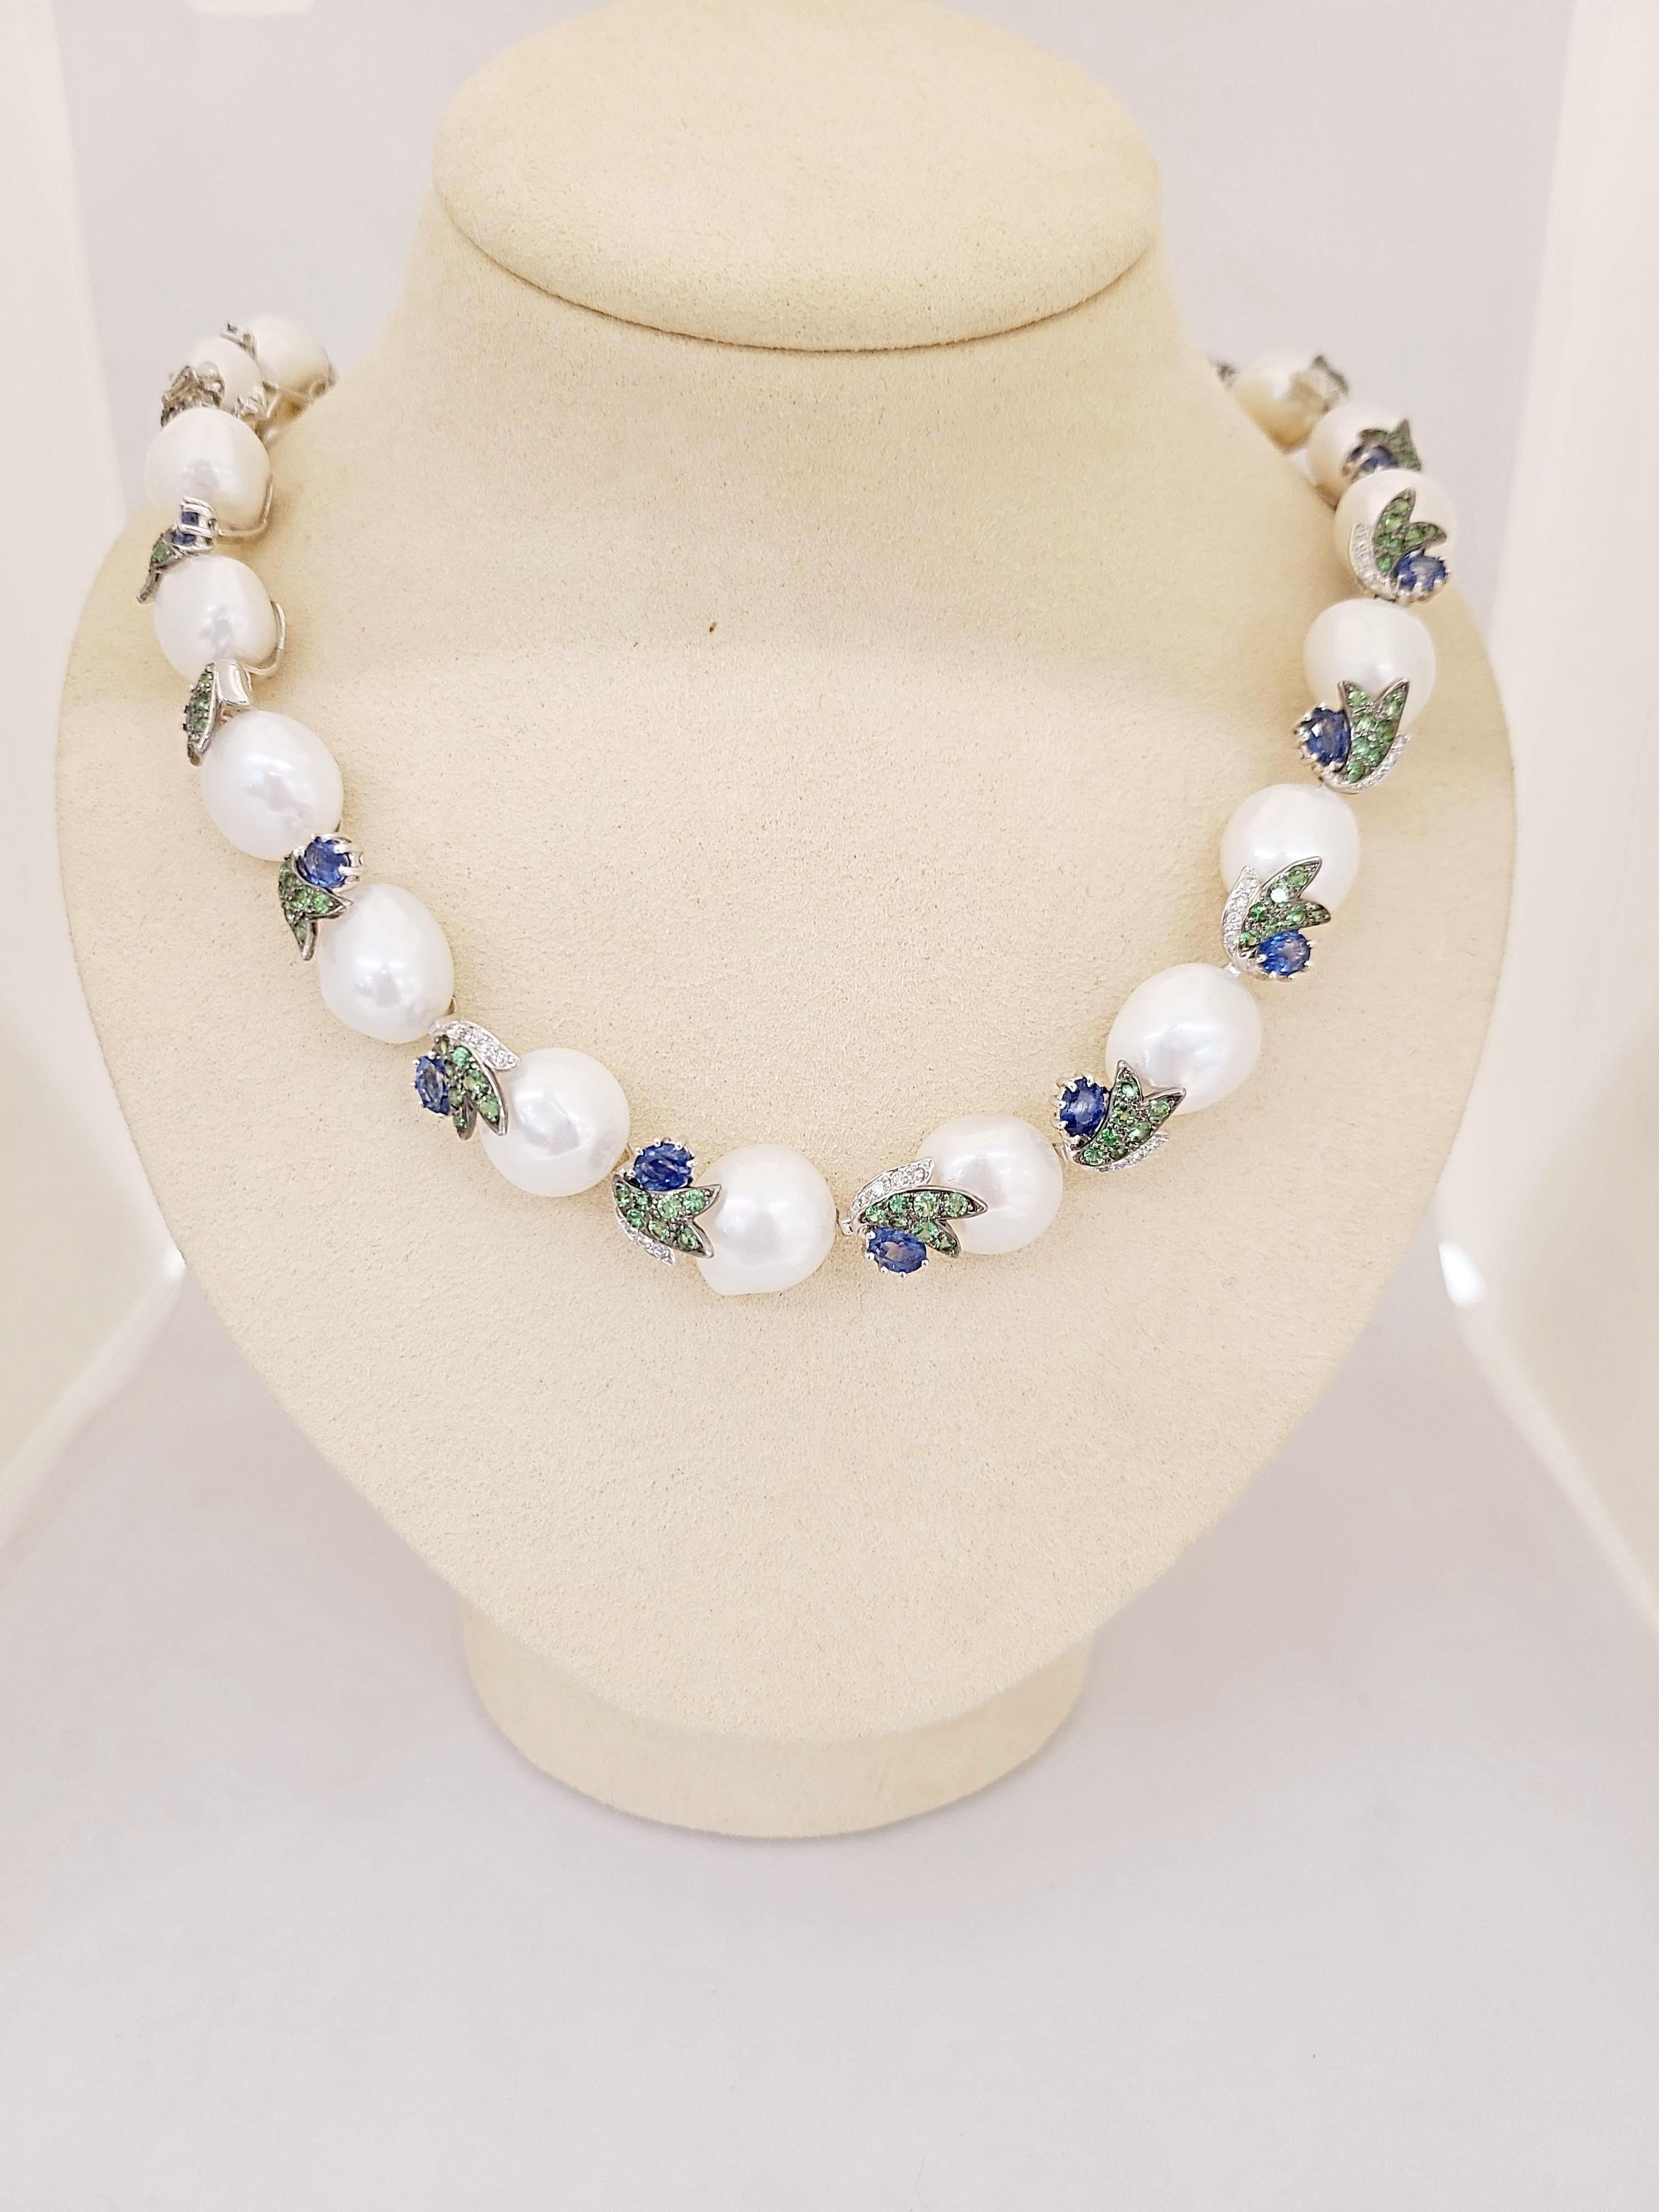 This beautiful 18 karat white gold collar necklace is designed with 22 semi Baroque Pearls , approximately 12mm. each. The pearls are connected by 18 kt white gold leaf sections with Diamonds and Tsavorites and a round Blue Sapphire. The total